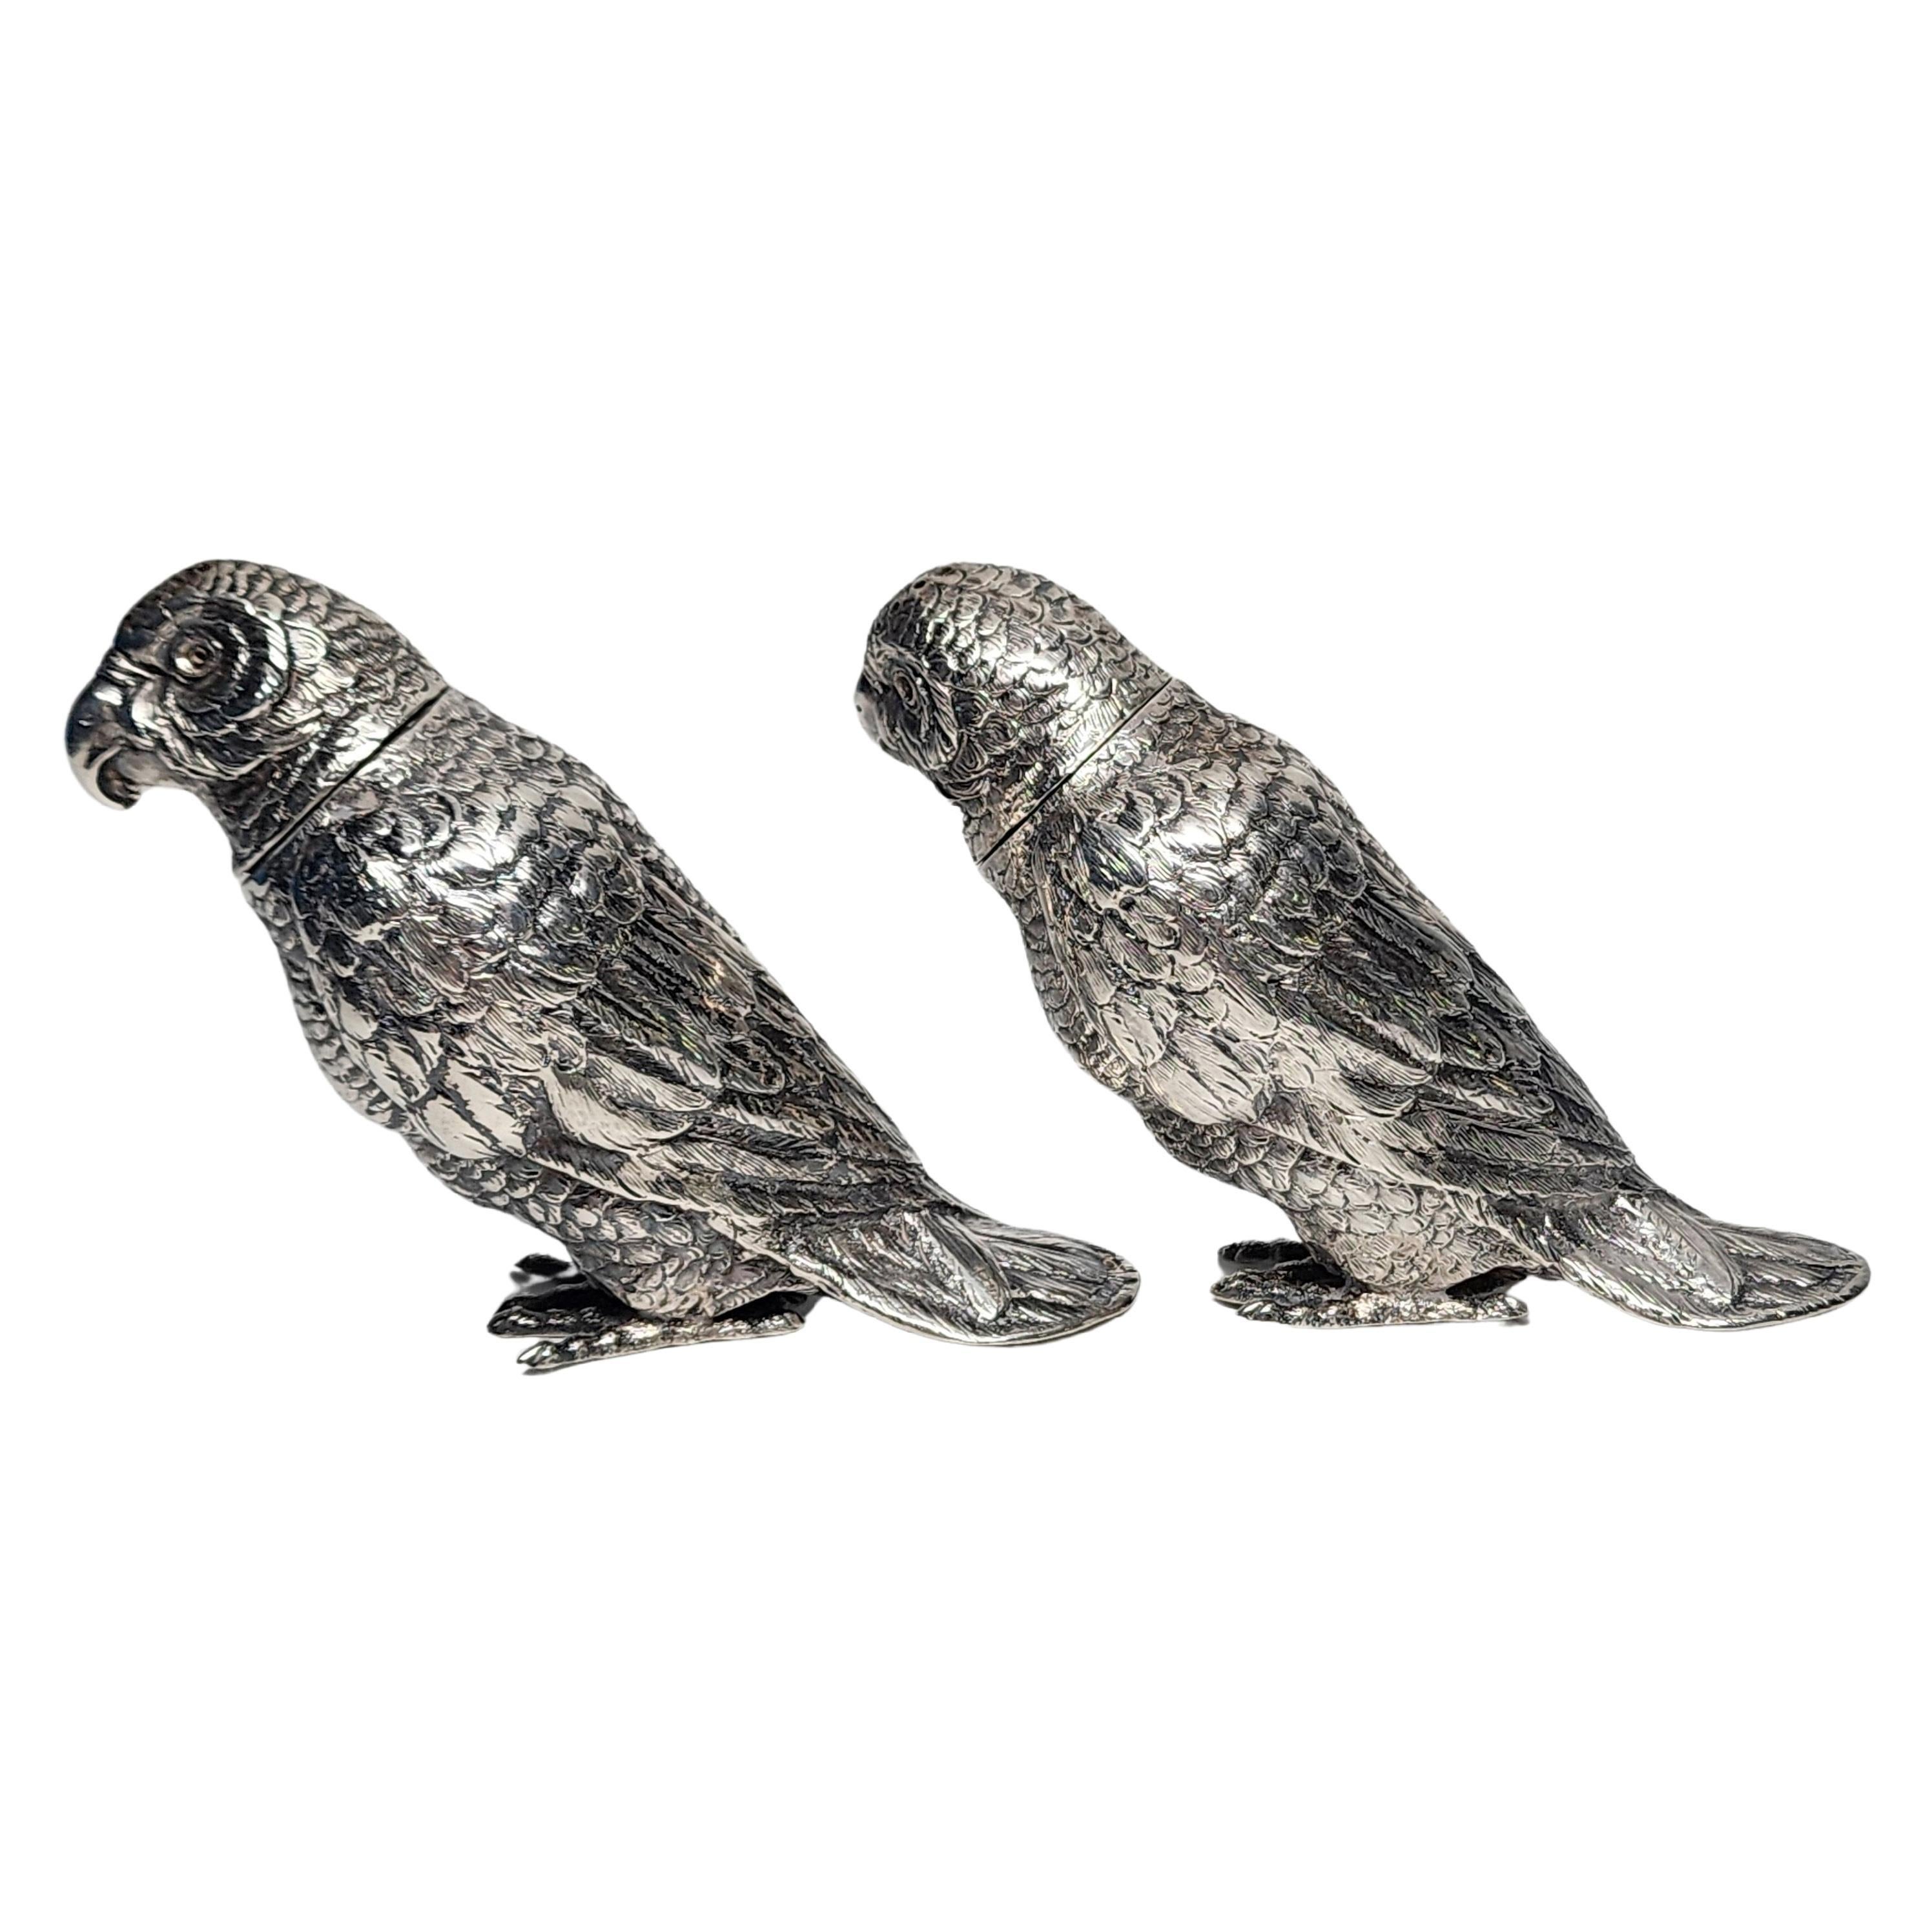 parrot salt and pepper shakers